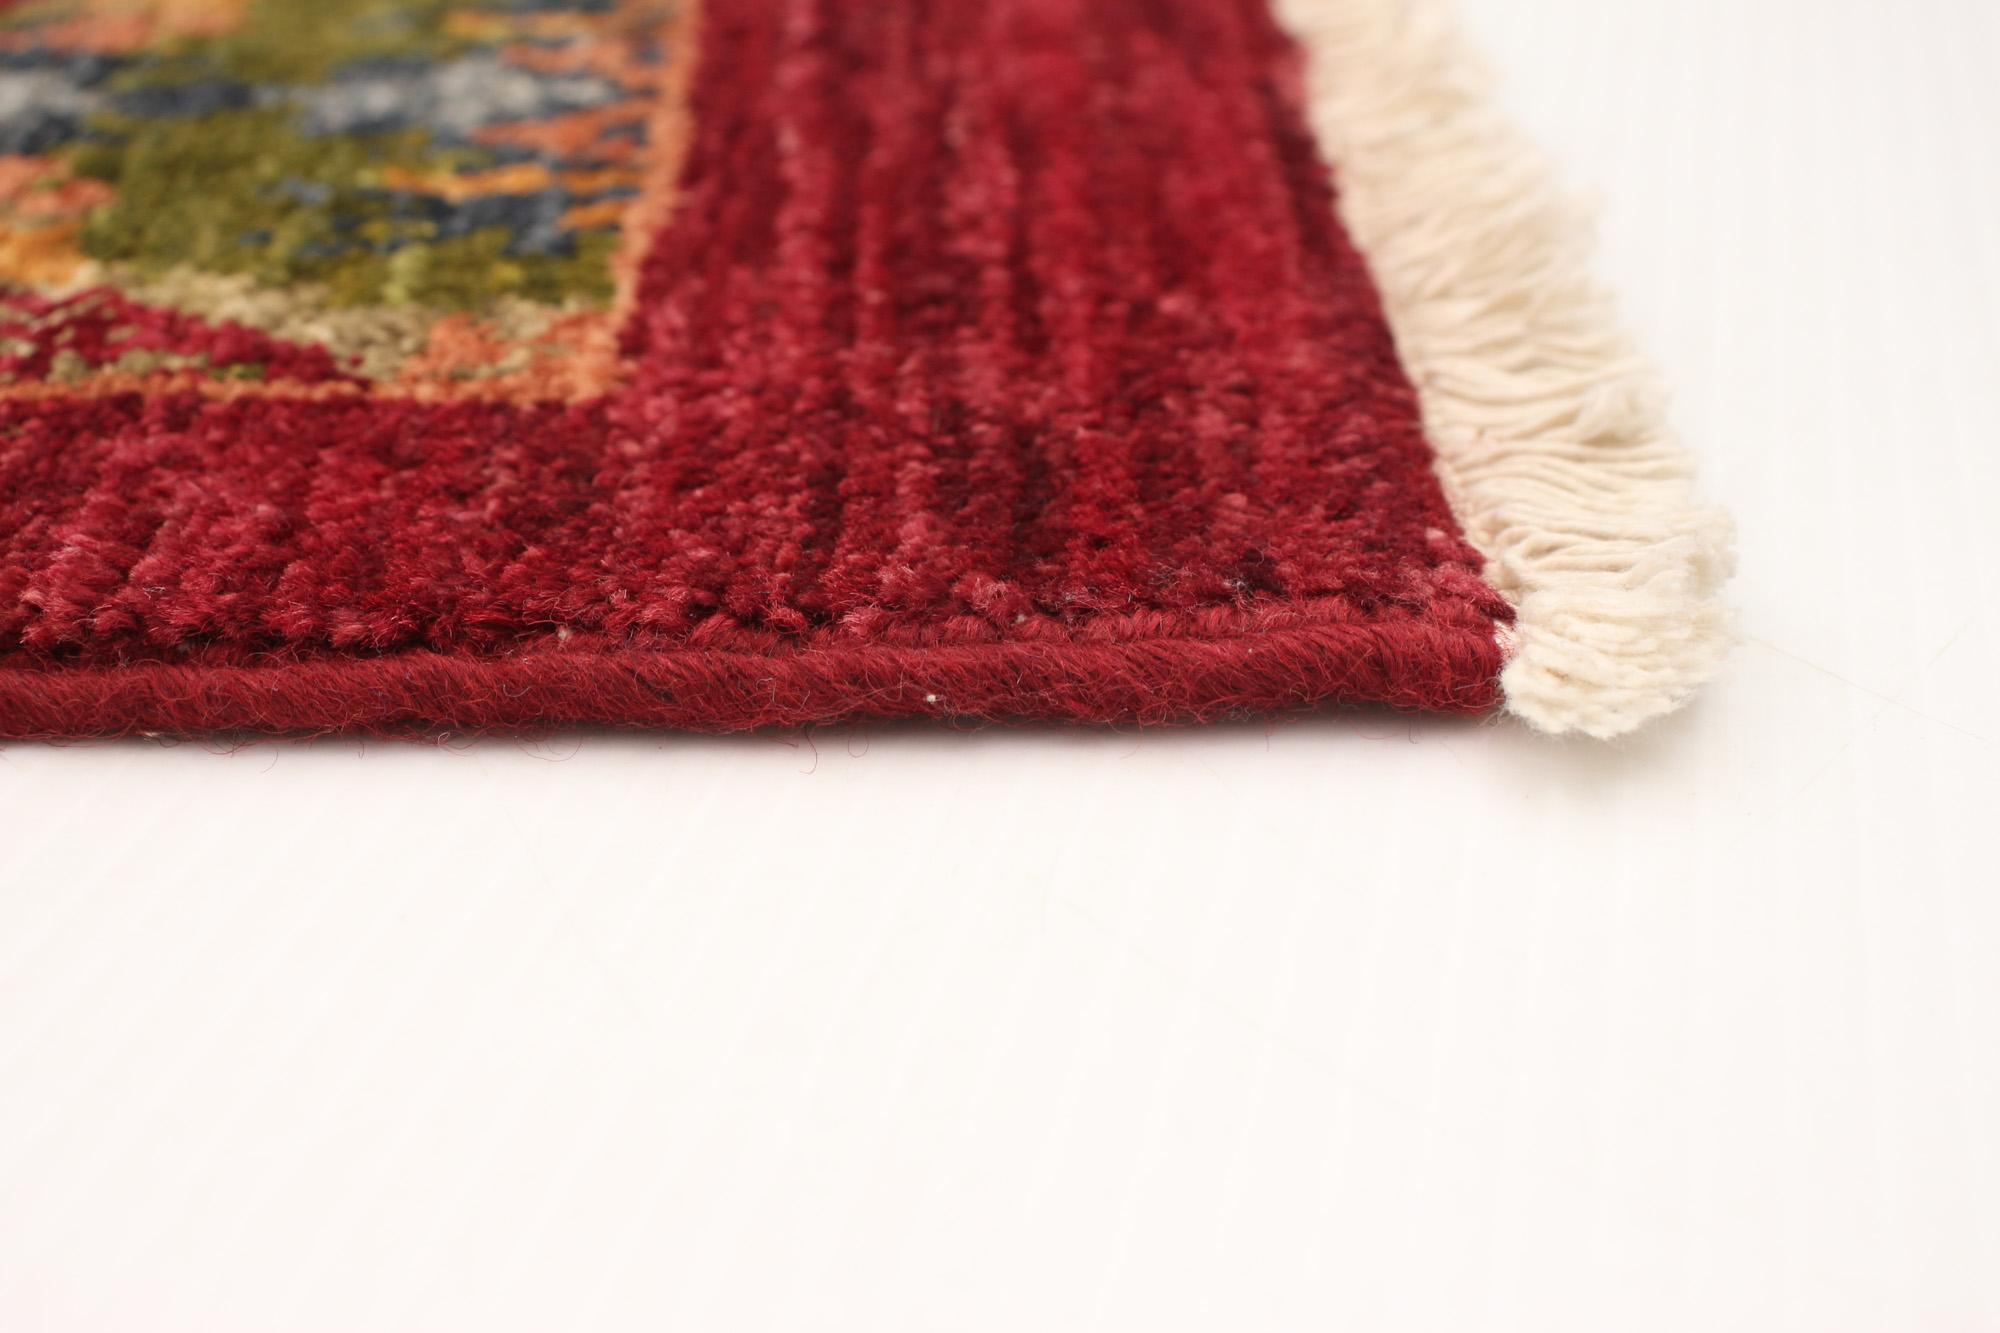 Vegetable Dyed Lahore Carpet, Transitional, Red, Taupe, Blue, and Green, Wool, 8’ x 10’ For Sale